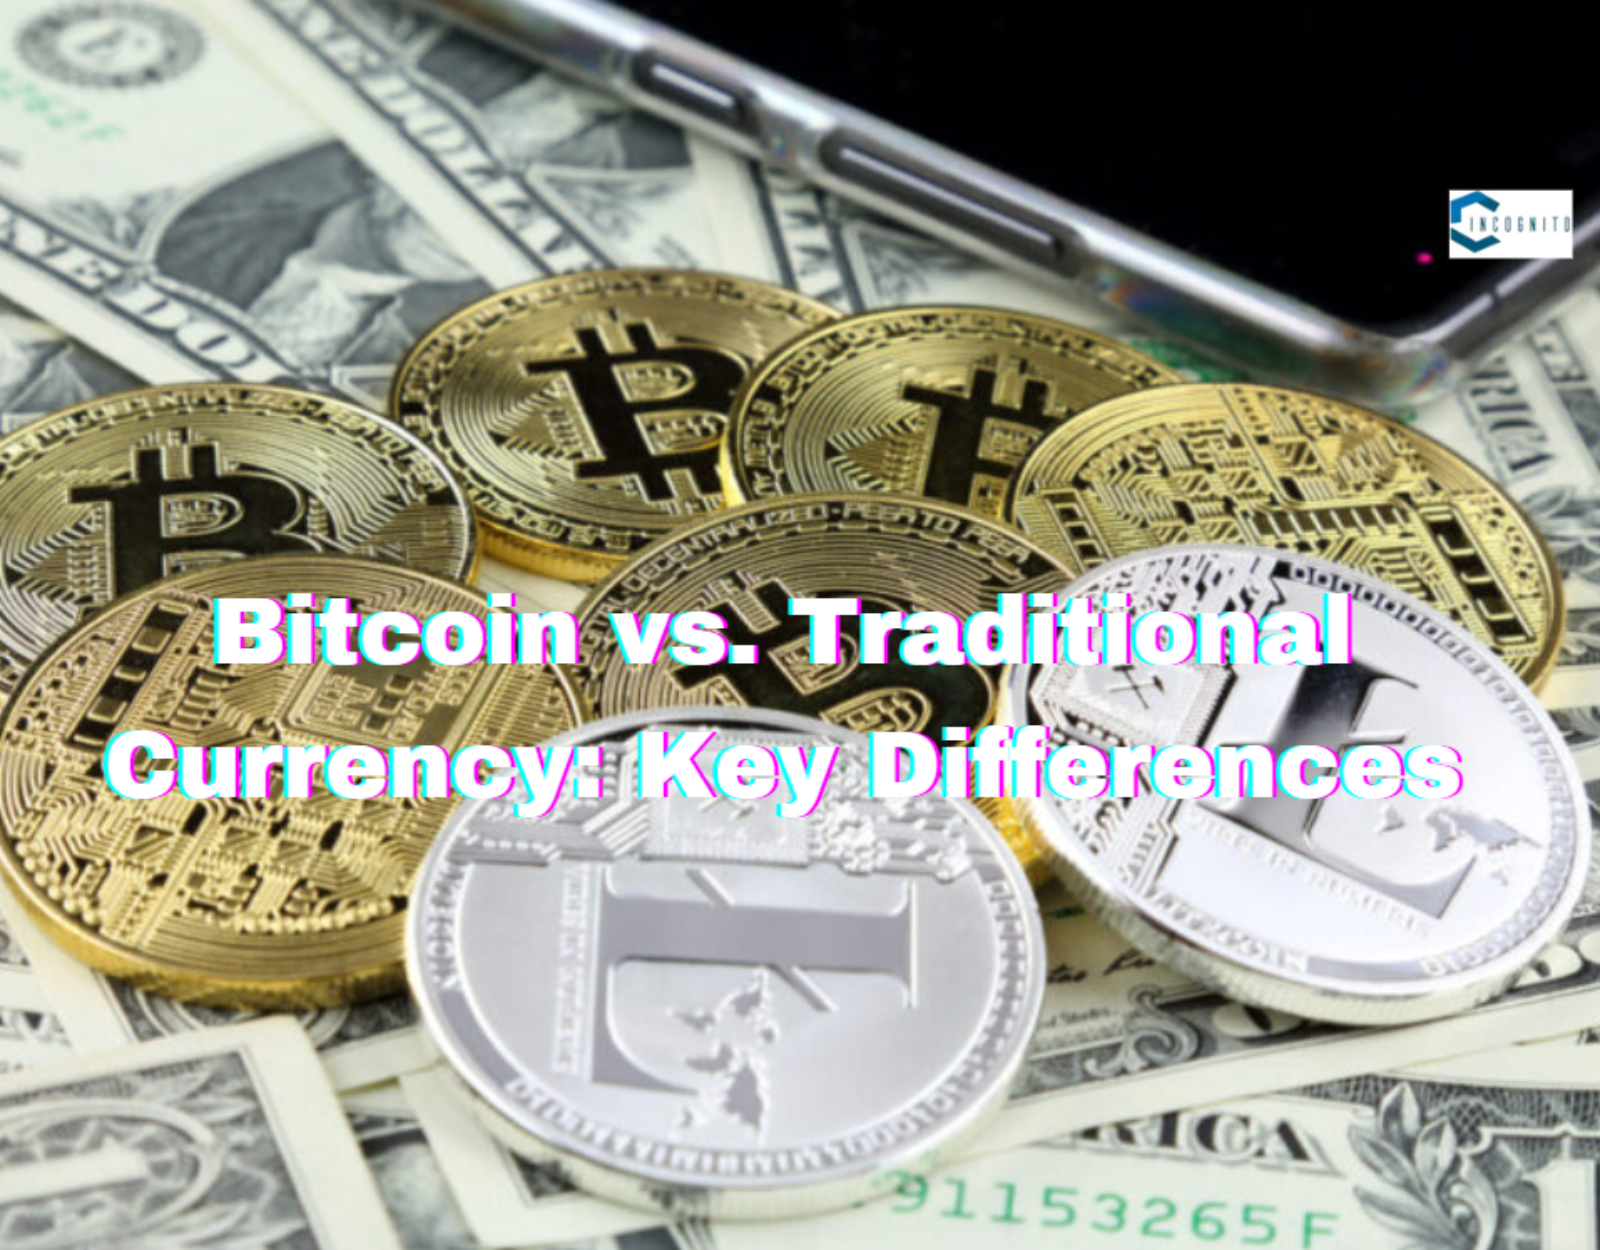 Bitcoin vs. Traditional Currency: Key Differences